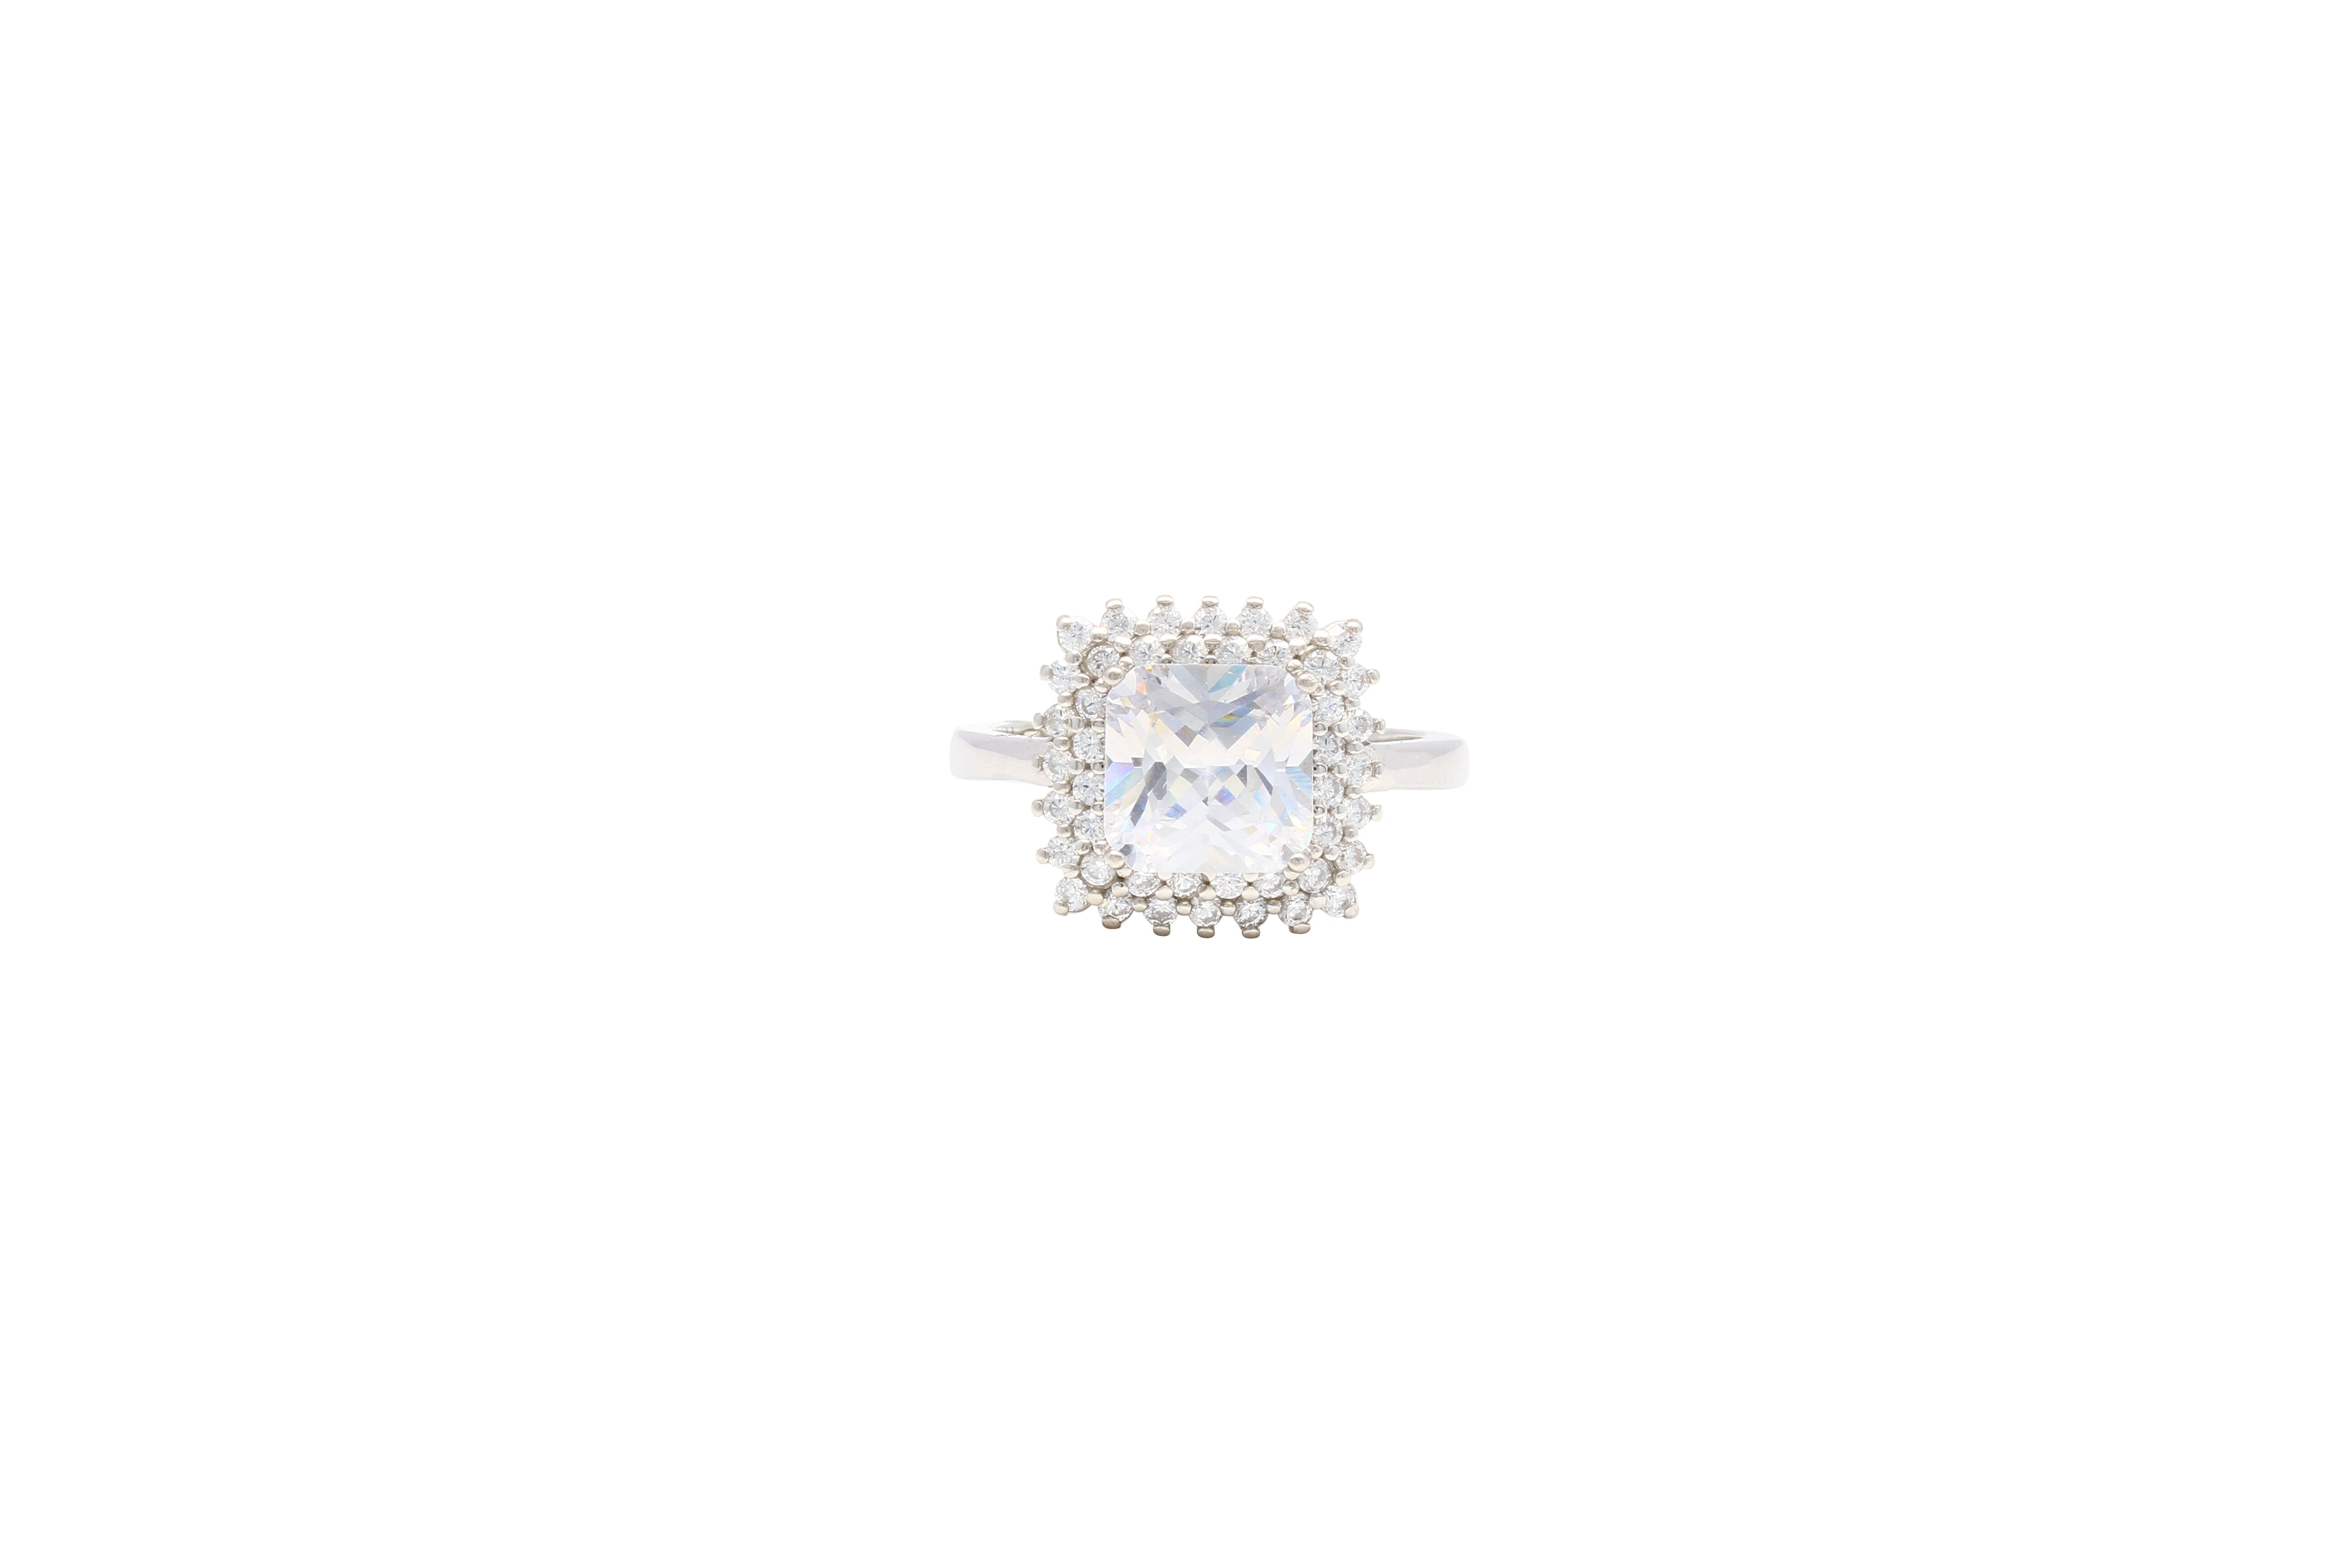 Asfour Cocktail Ring Inlaid With Cushion Cut Zircon Stone In 925 Sterling Silver RR0328-W-9